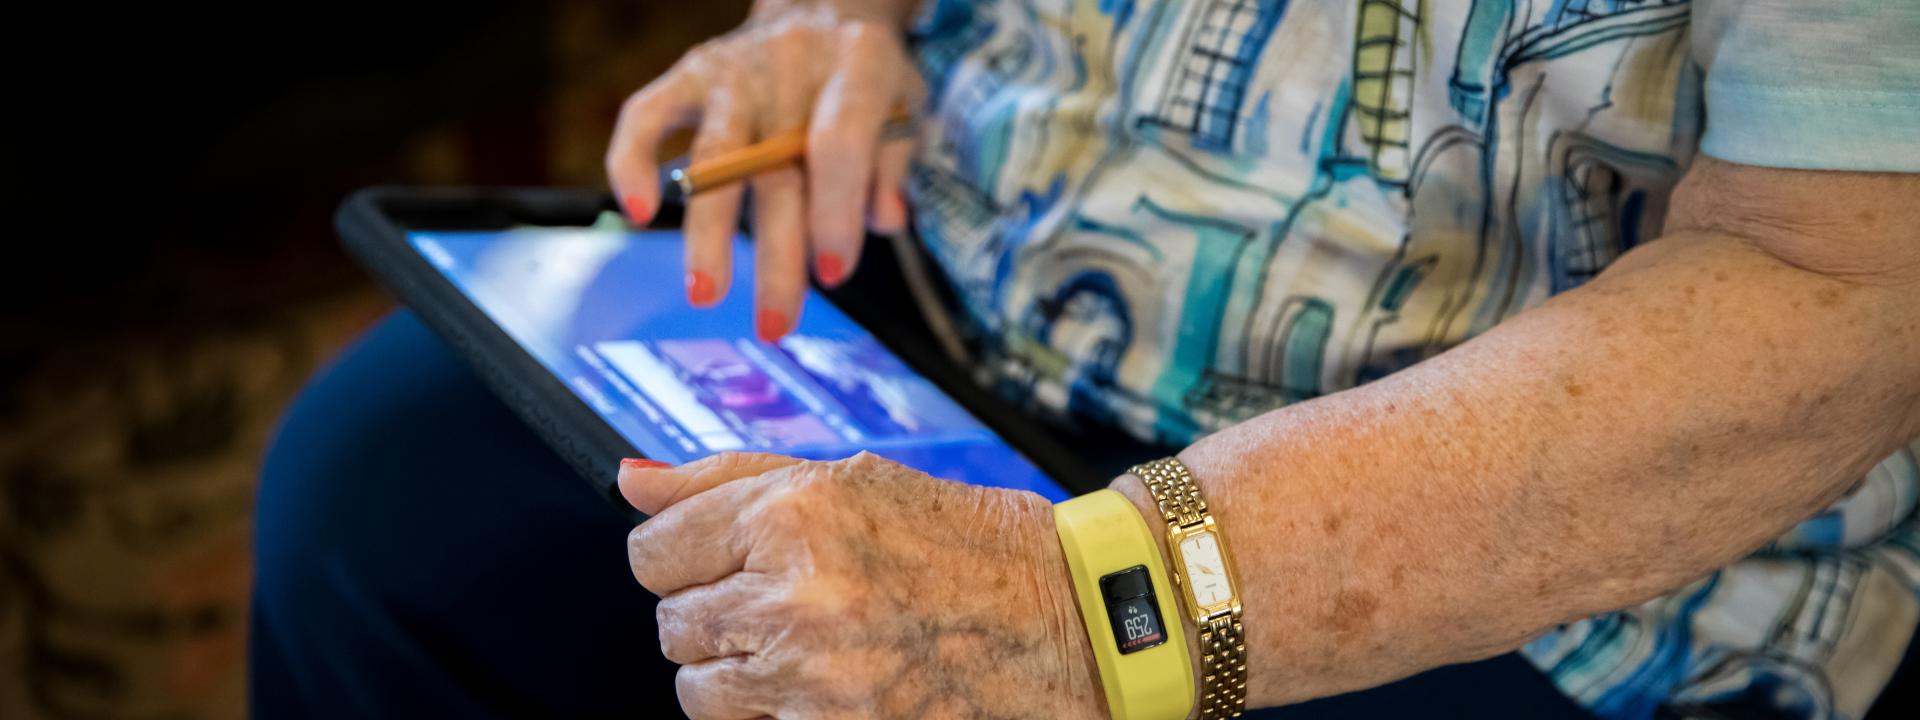 Resident using her iPad and wearing a smart watch.